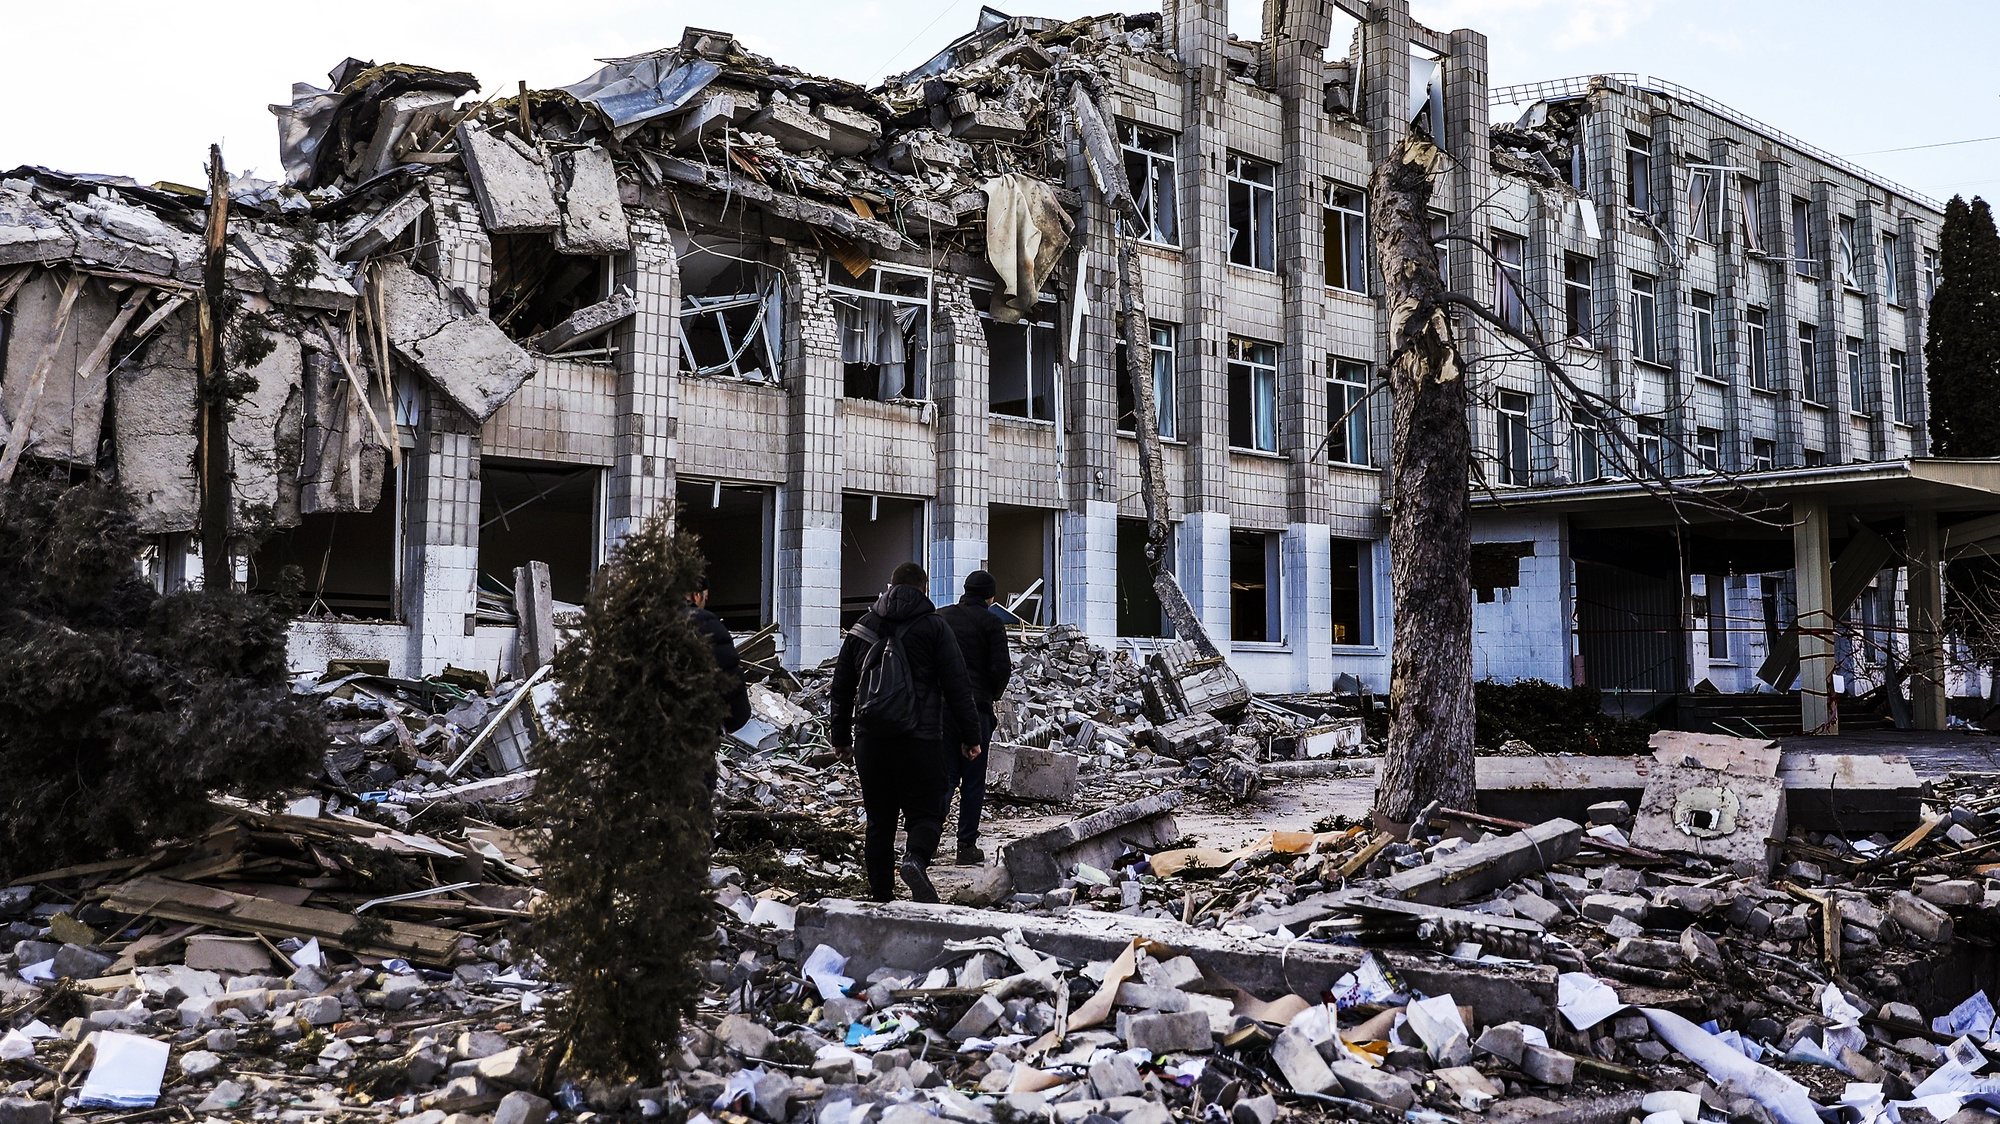 The main building of school number 25 in Zhytomyr, Ukraine destroyed after being bombed, March 11, 2022. Russian troops entered Ukraine on 24 February prompting the country&#039;s president to declare martial law and triggering a series of announcements by Western countries to impose severe economic sanctions on Russia.  MIGUEL A. LOPES/LUSA